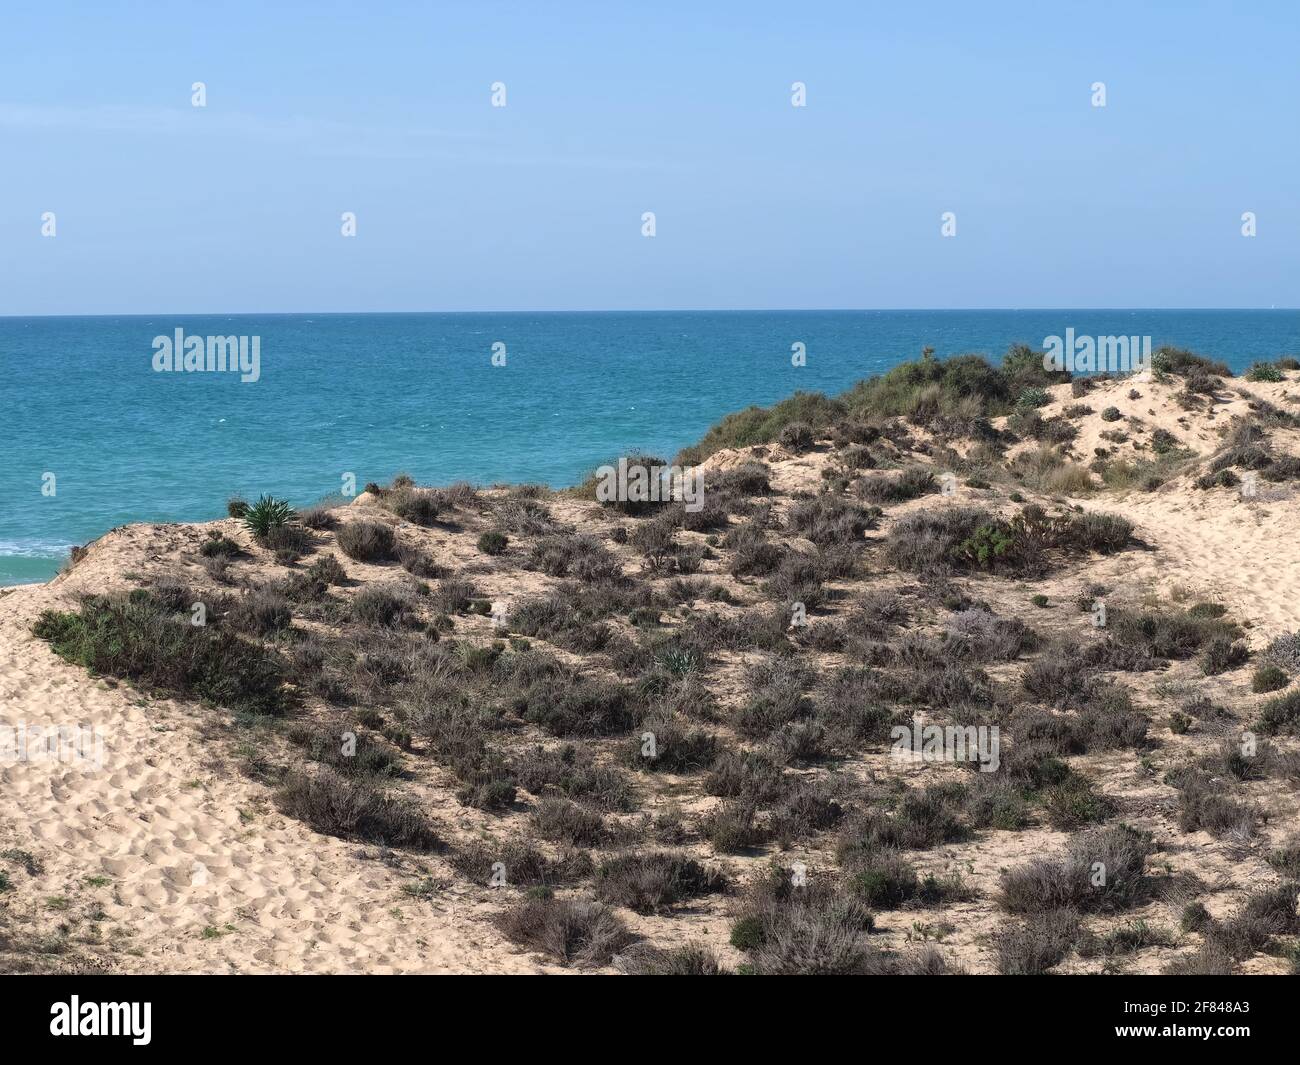 Dunes and sea of Armacaou de Pera at the algarve coast of Portugal Stock Photo